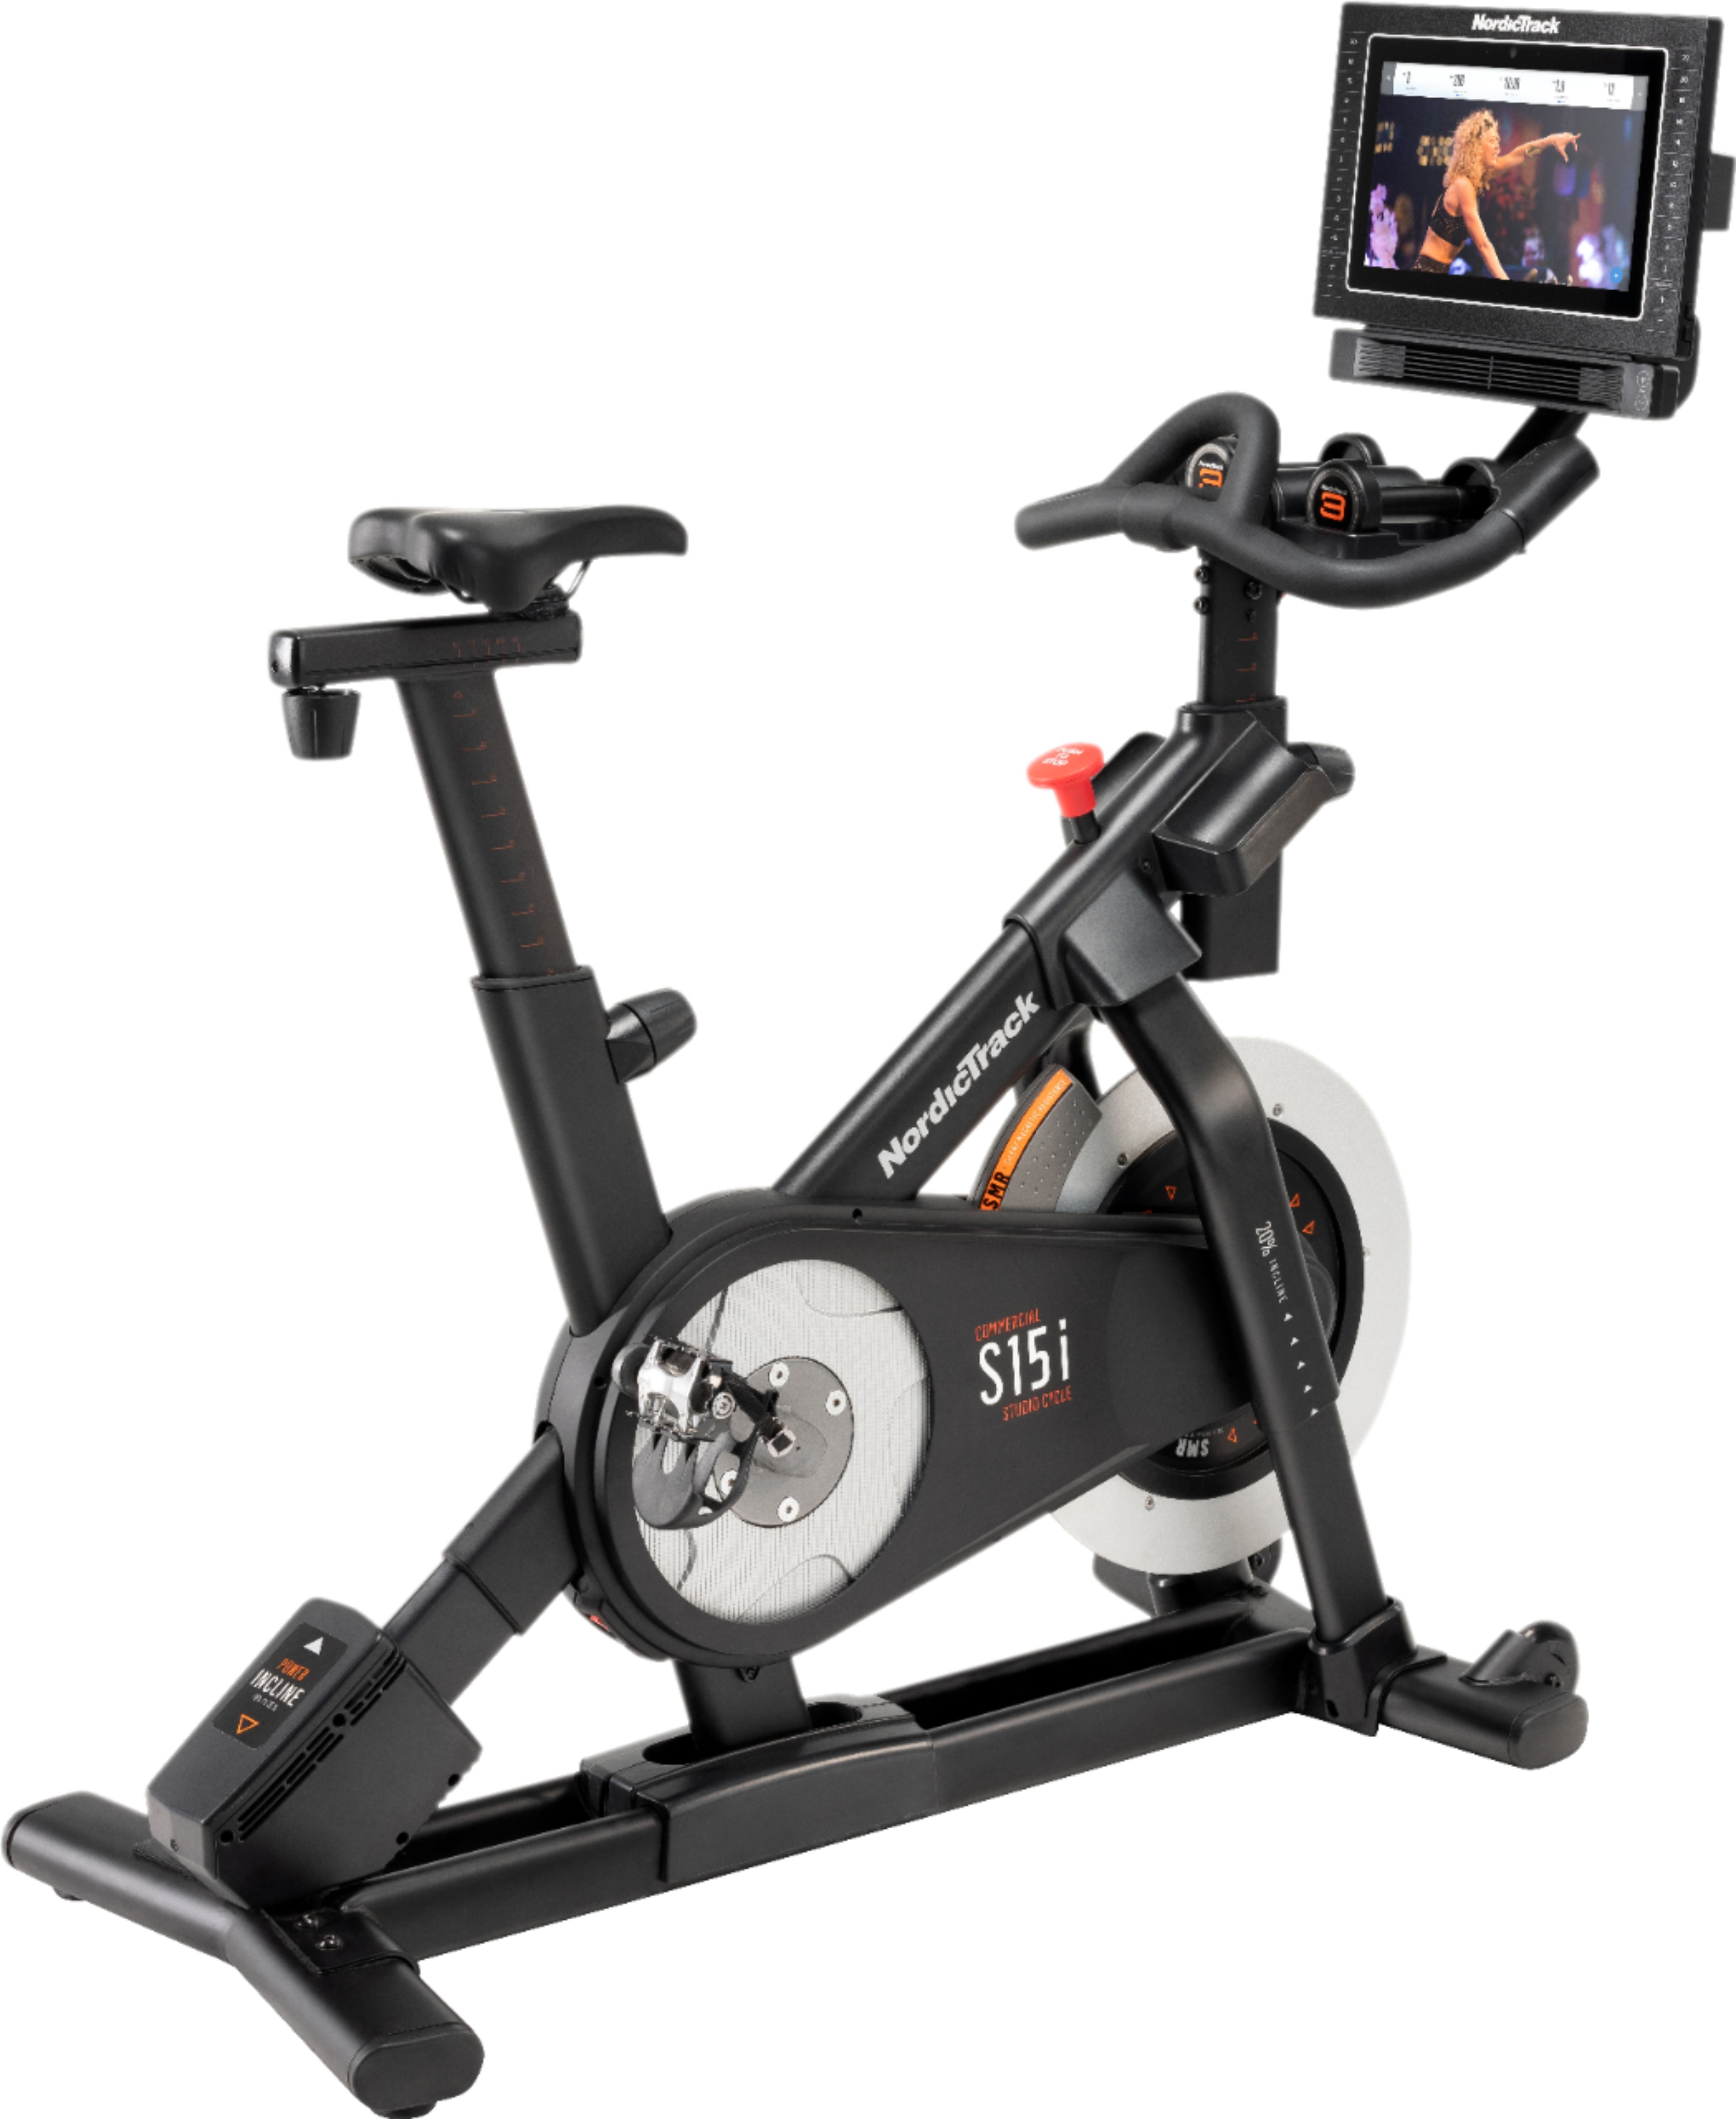 Angle View: NordicTrack - Commercial VU 19 - Black/Gray